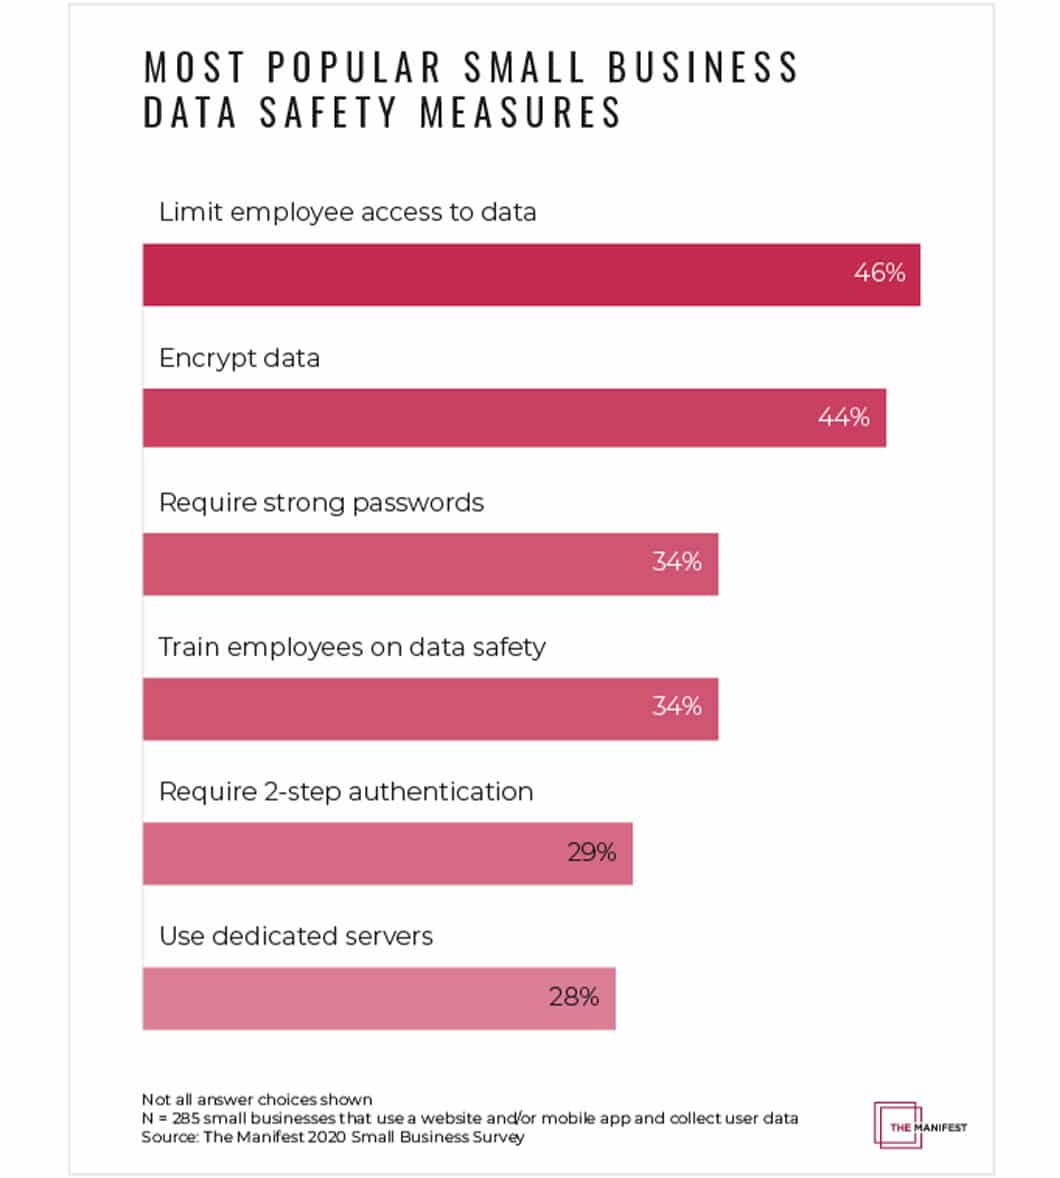 The Manifest's Data Safety for Small Businesses lists requiring strong passwords as third among the most popular small business data safety measures.